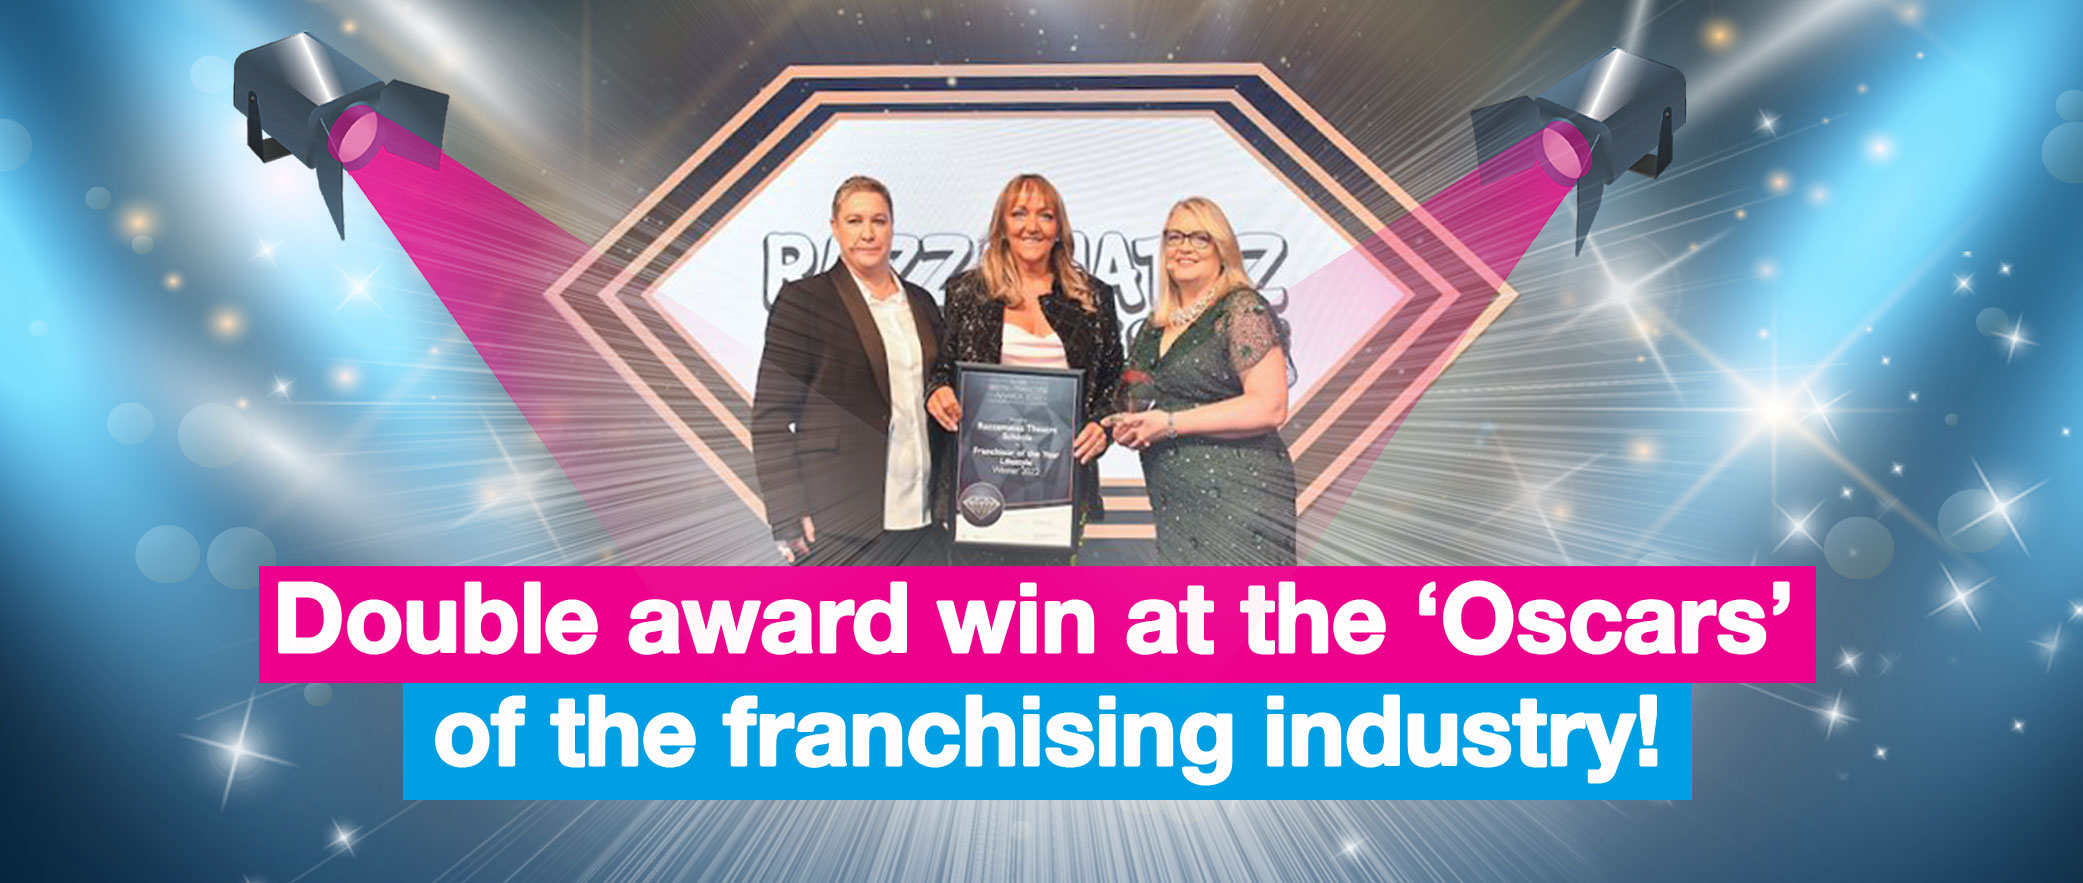 Double award win at the Oscars of the franchising industry!